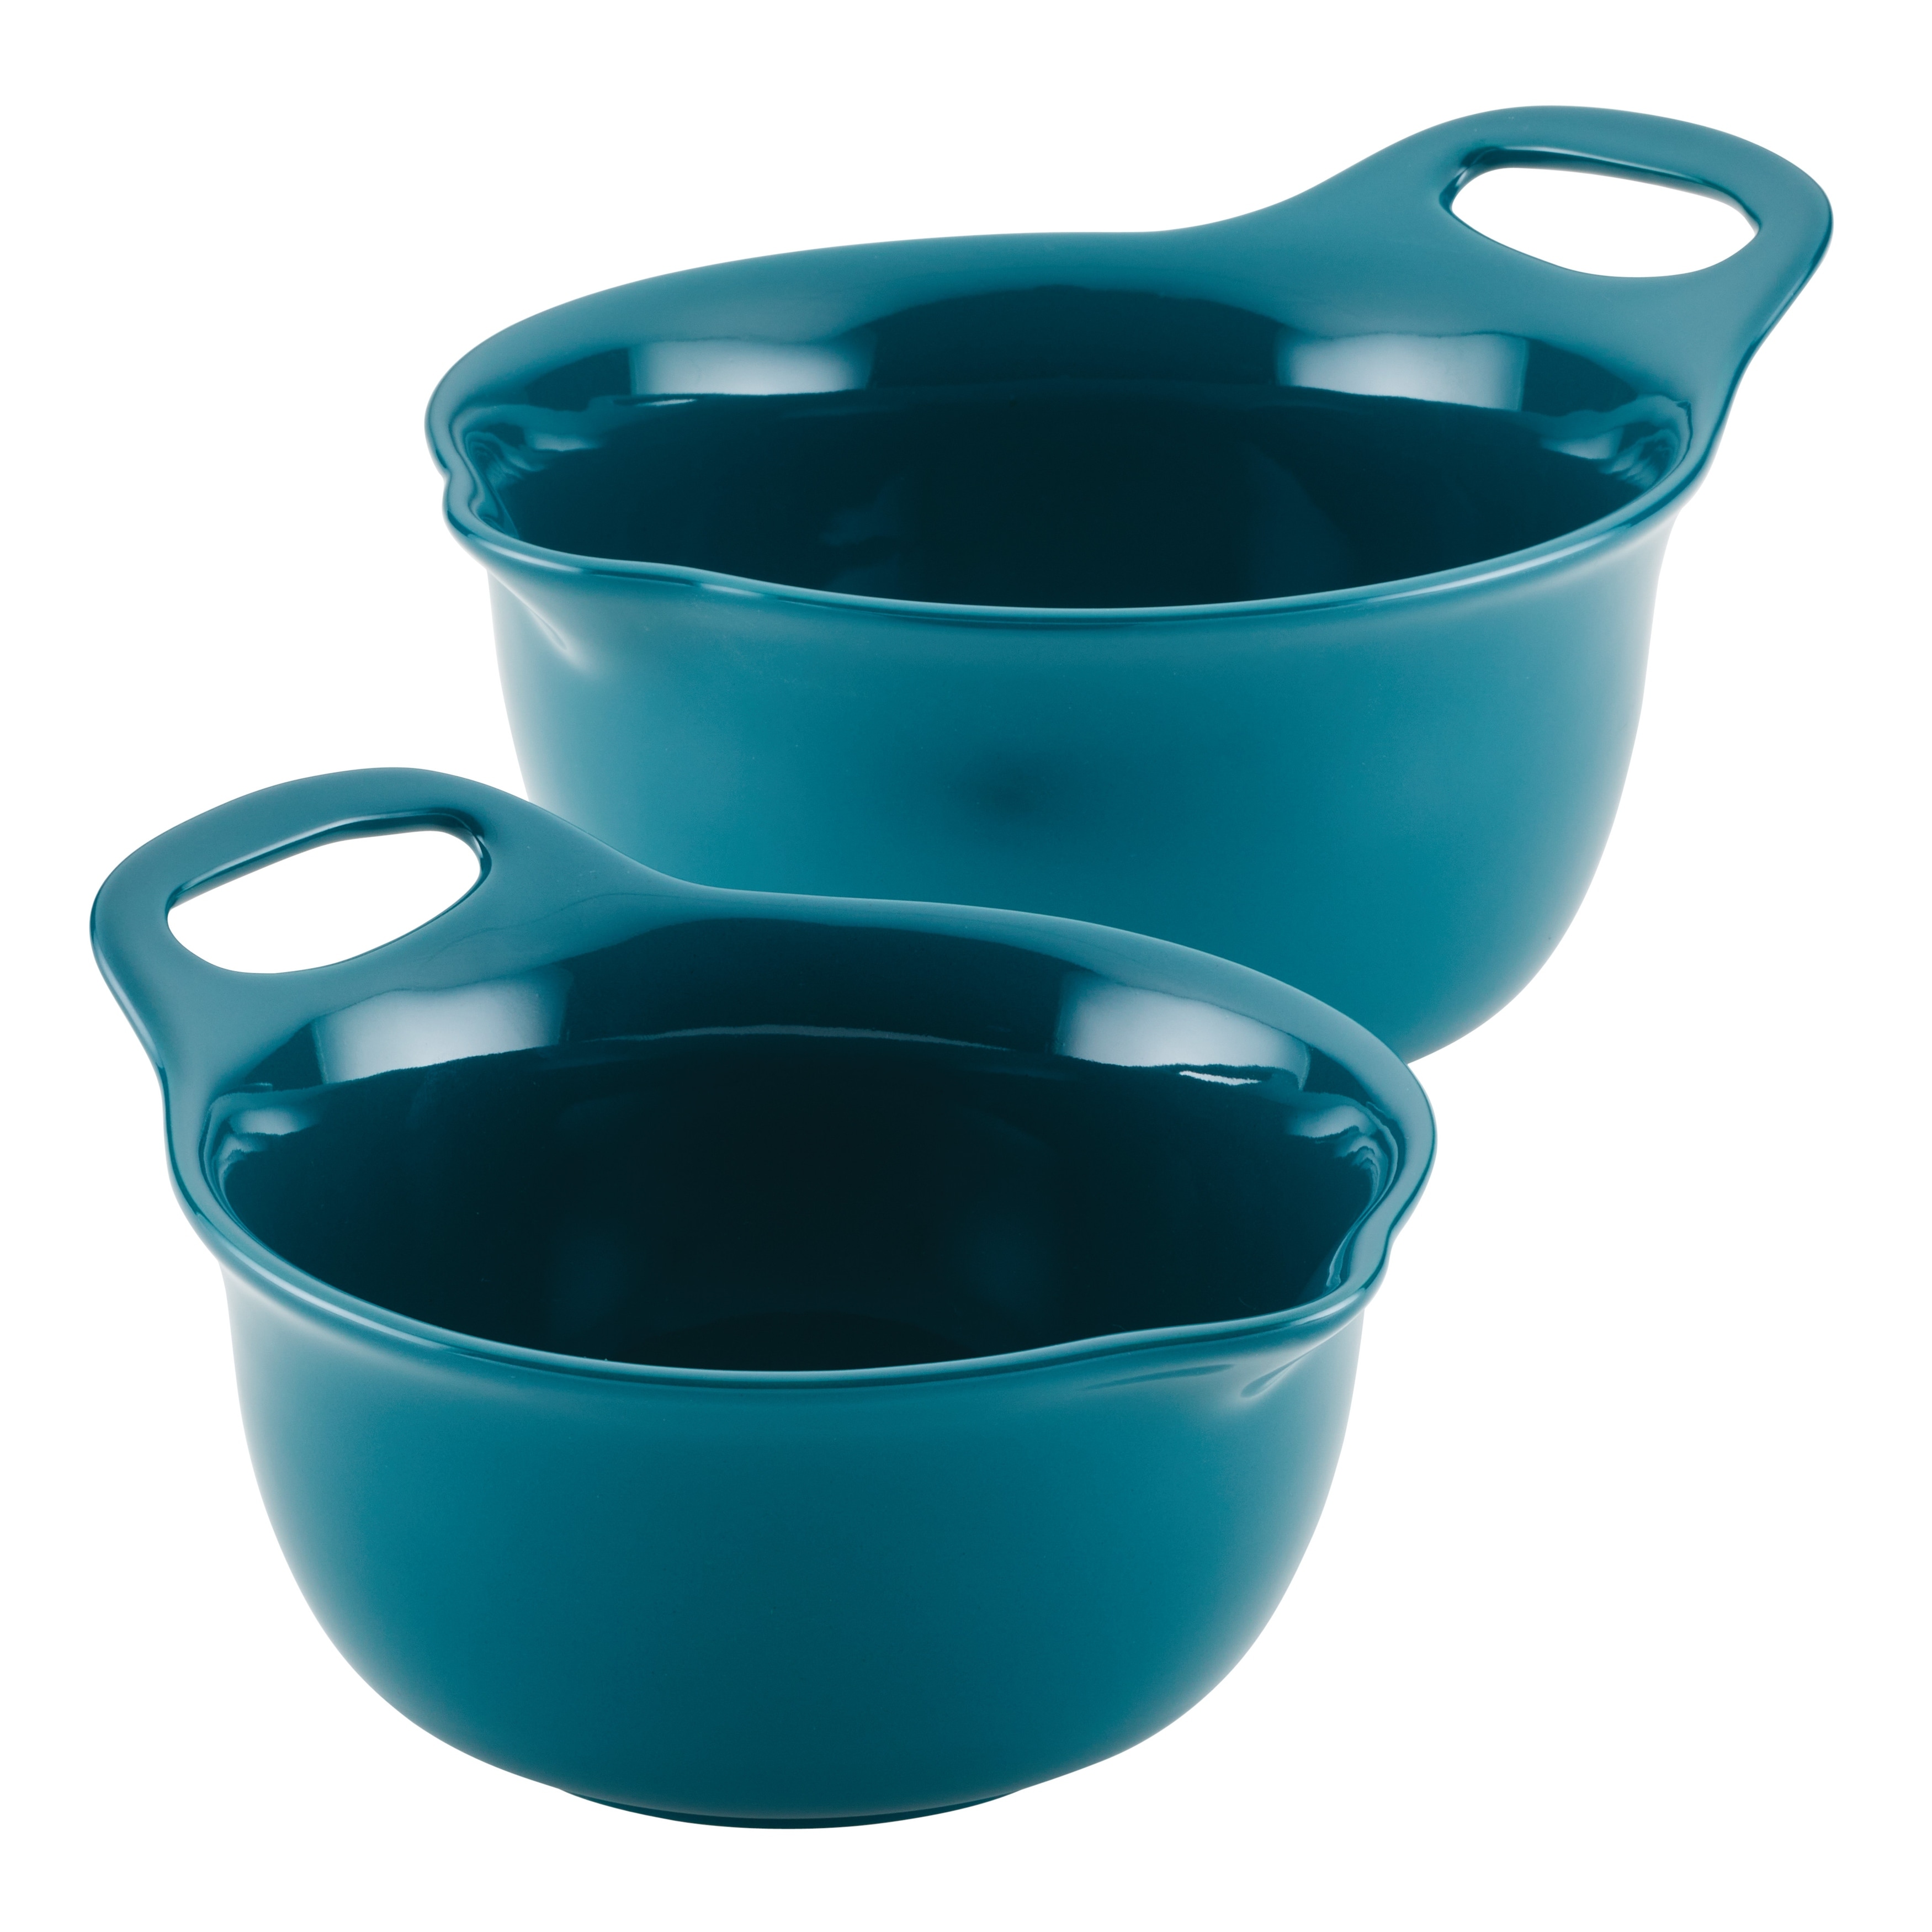 https://ak1.ostkcdn.com/images/products/is/images/direct/aaed58d238040e3580dc6be3215b5ac441aae28e/Rachael-Ray-Ceramic-Mixing-Bowl-Set%2C-2-Piece%2C-Dark-Gray.jpg